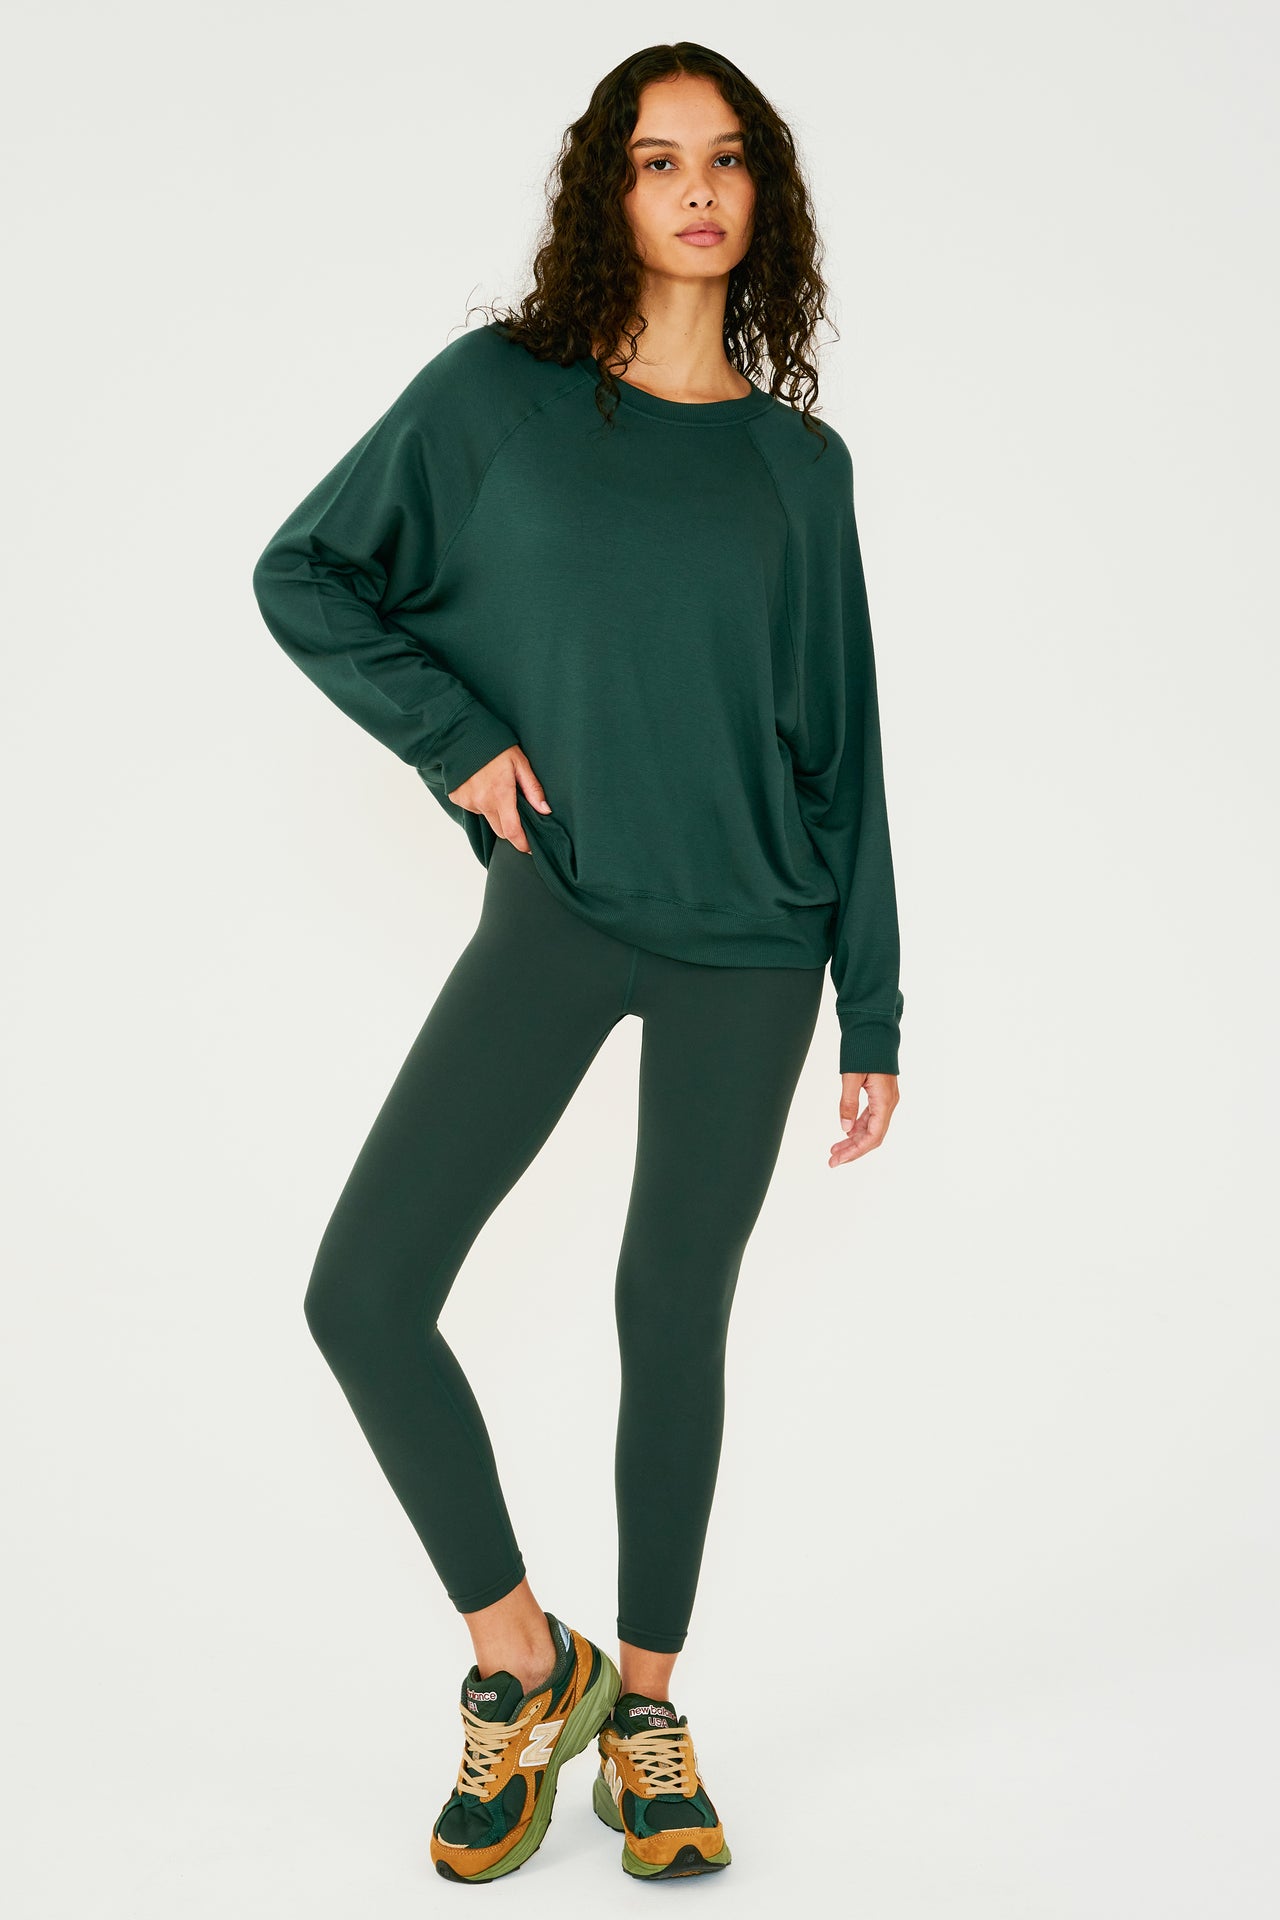 Full front view of girl wearing dark green sweatshirt with visible stitching and ribbed hem, with dark green leggings and multi colored shoes